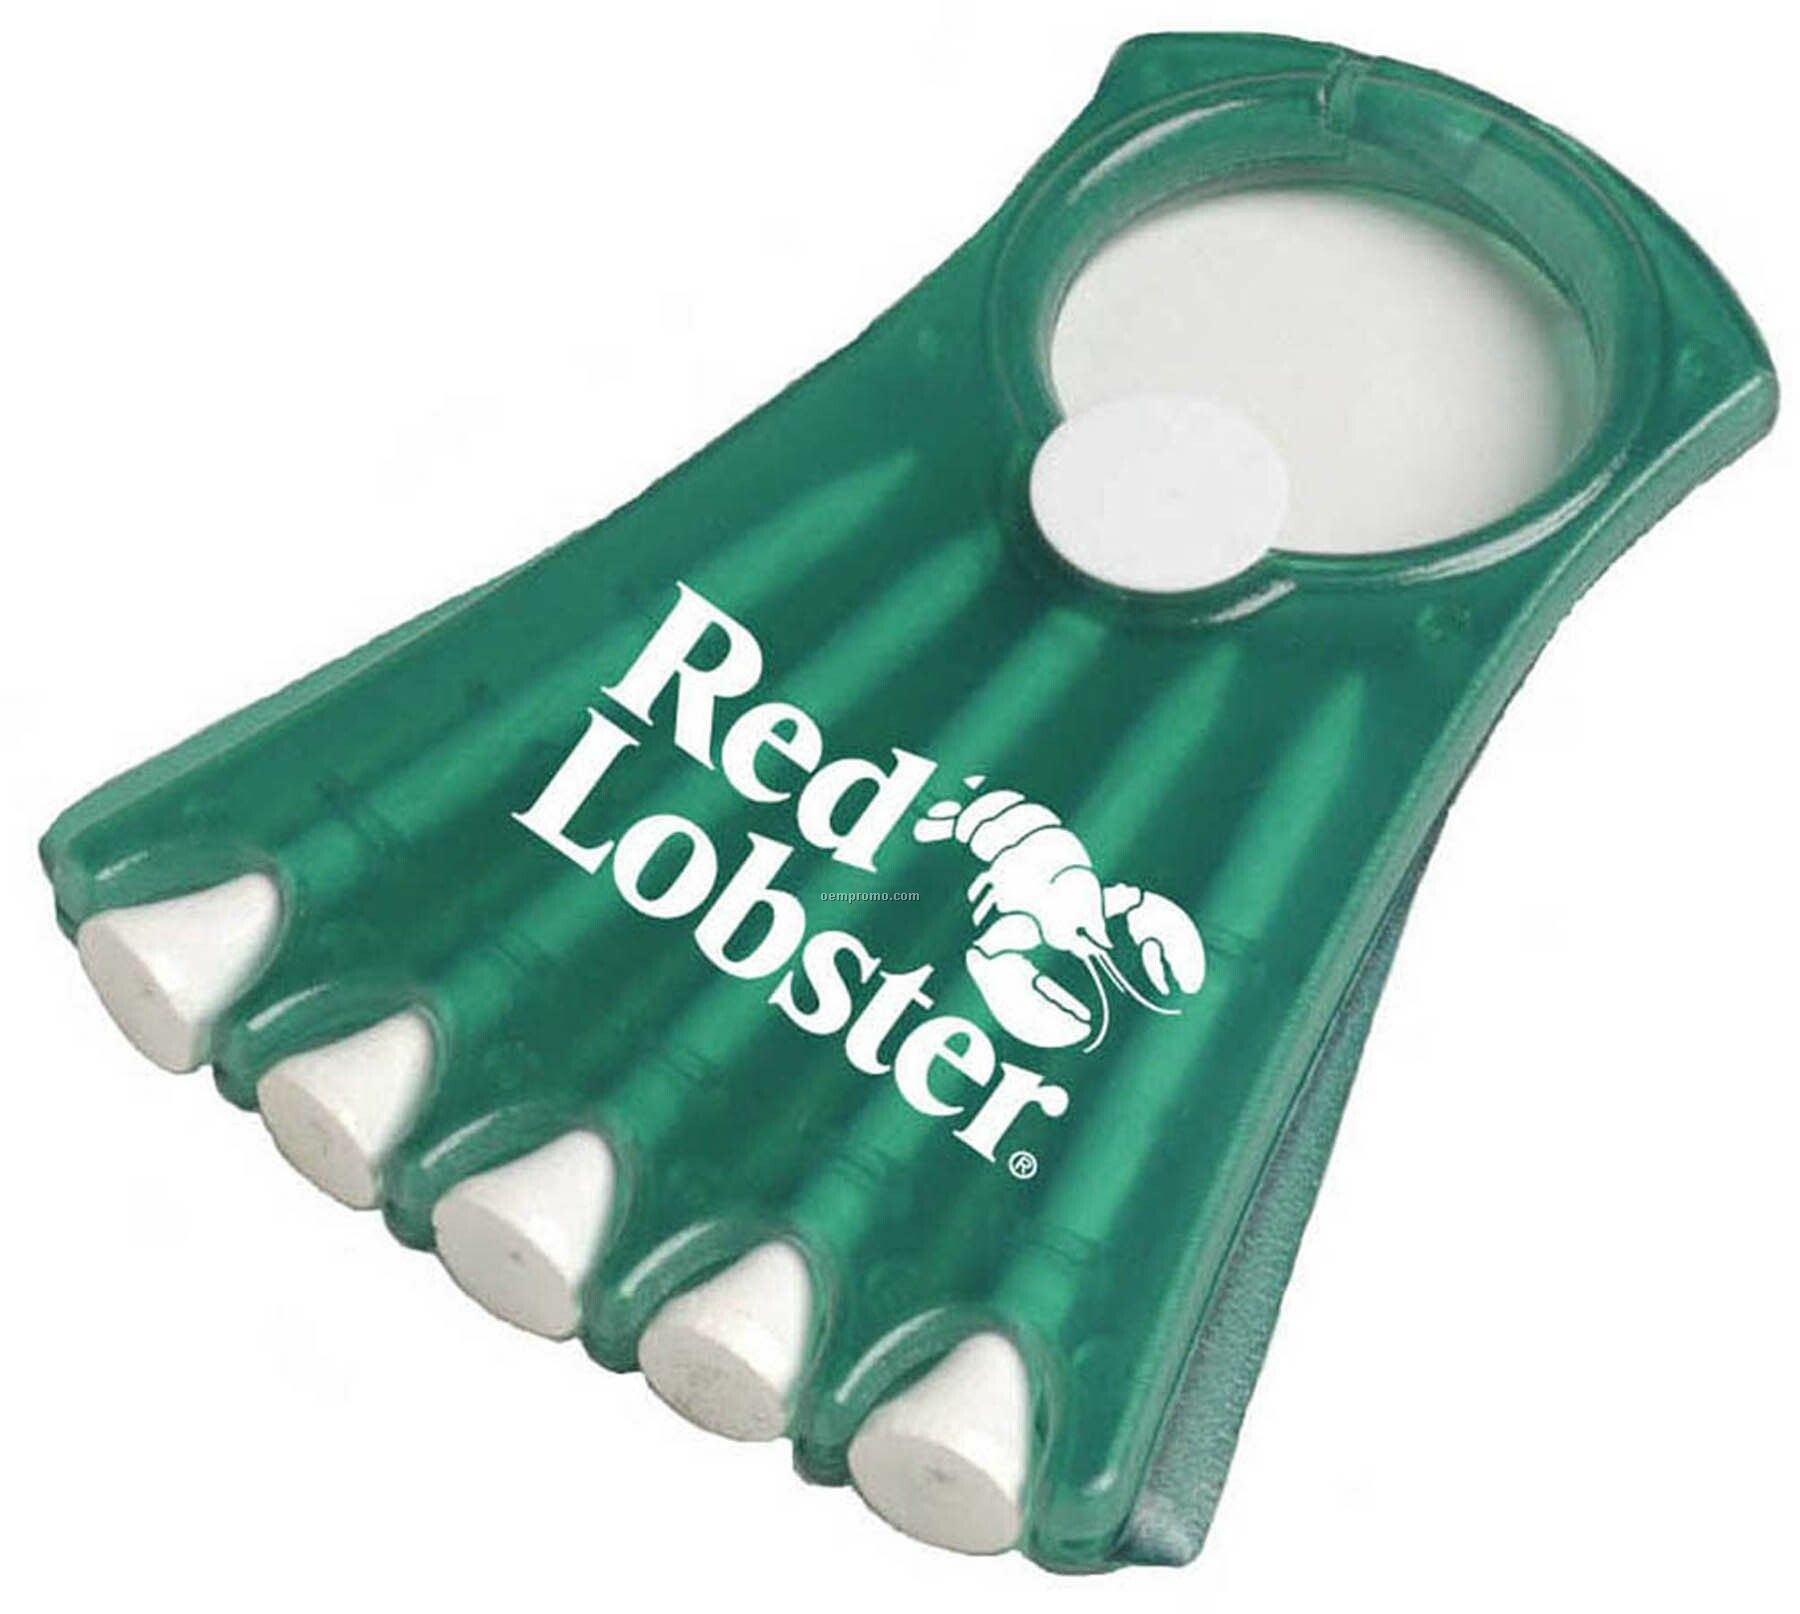 Golf Tee Holder, Holds Five Tees And Ball Marker--5 Day Production